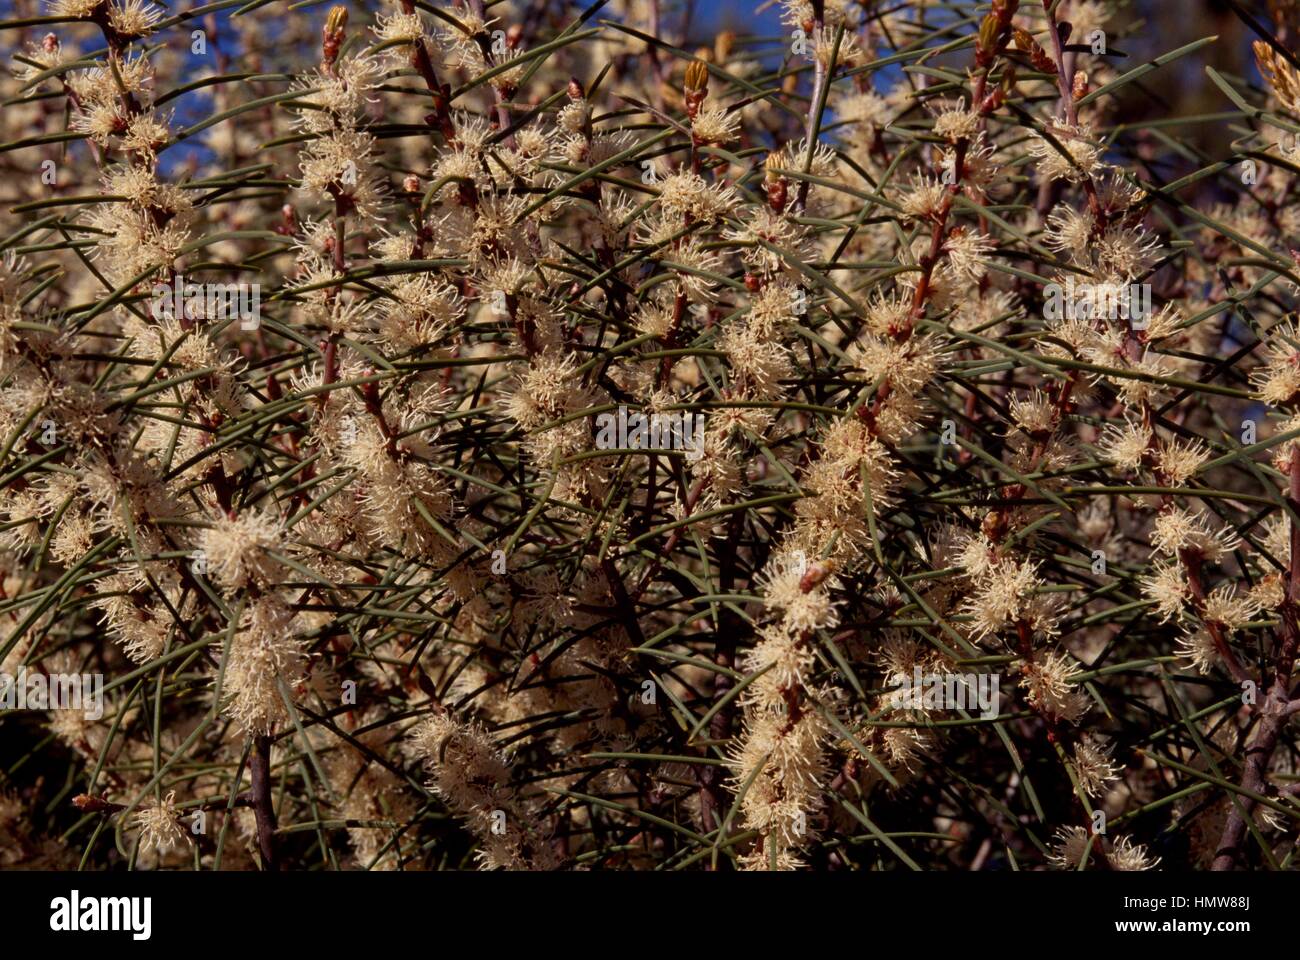 Narrow-leaved red mallee inflorescences (Eucalyptus leptophylla), Myrtaceae. Stock Photo